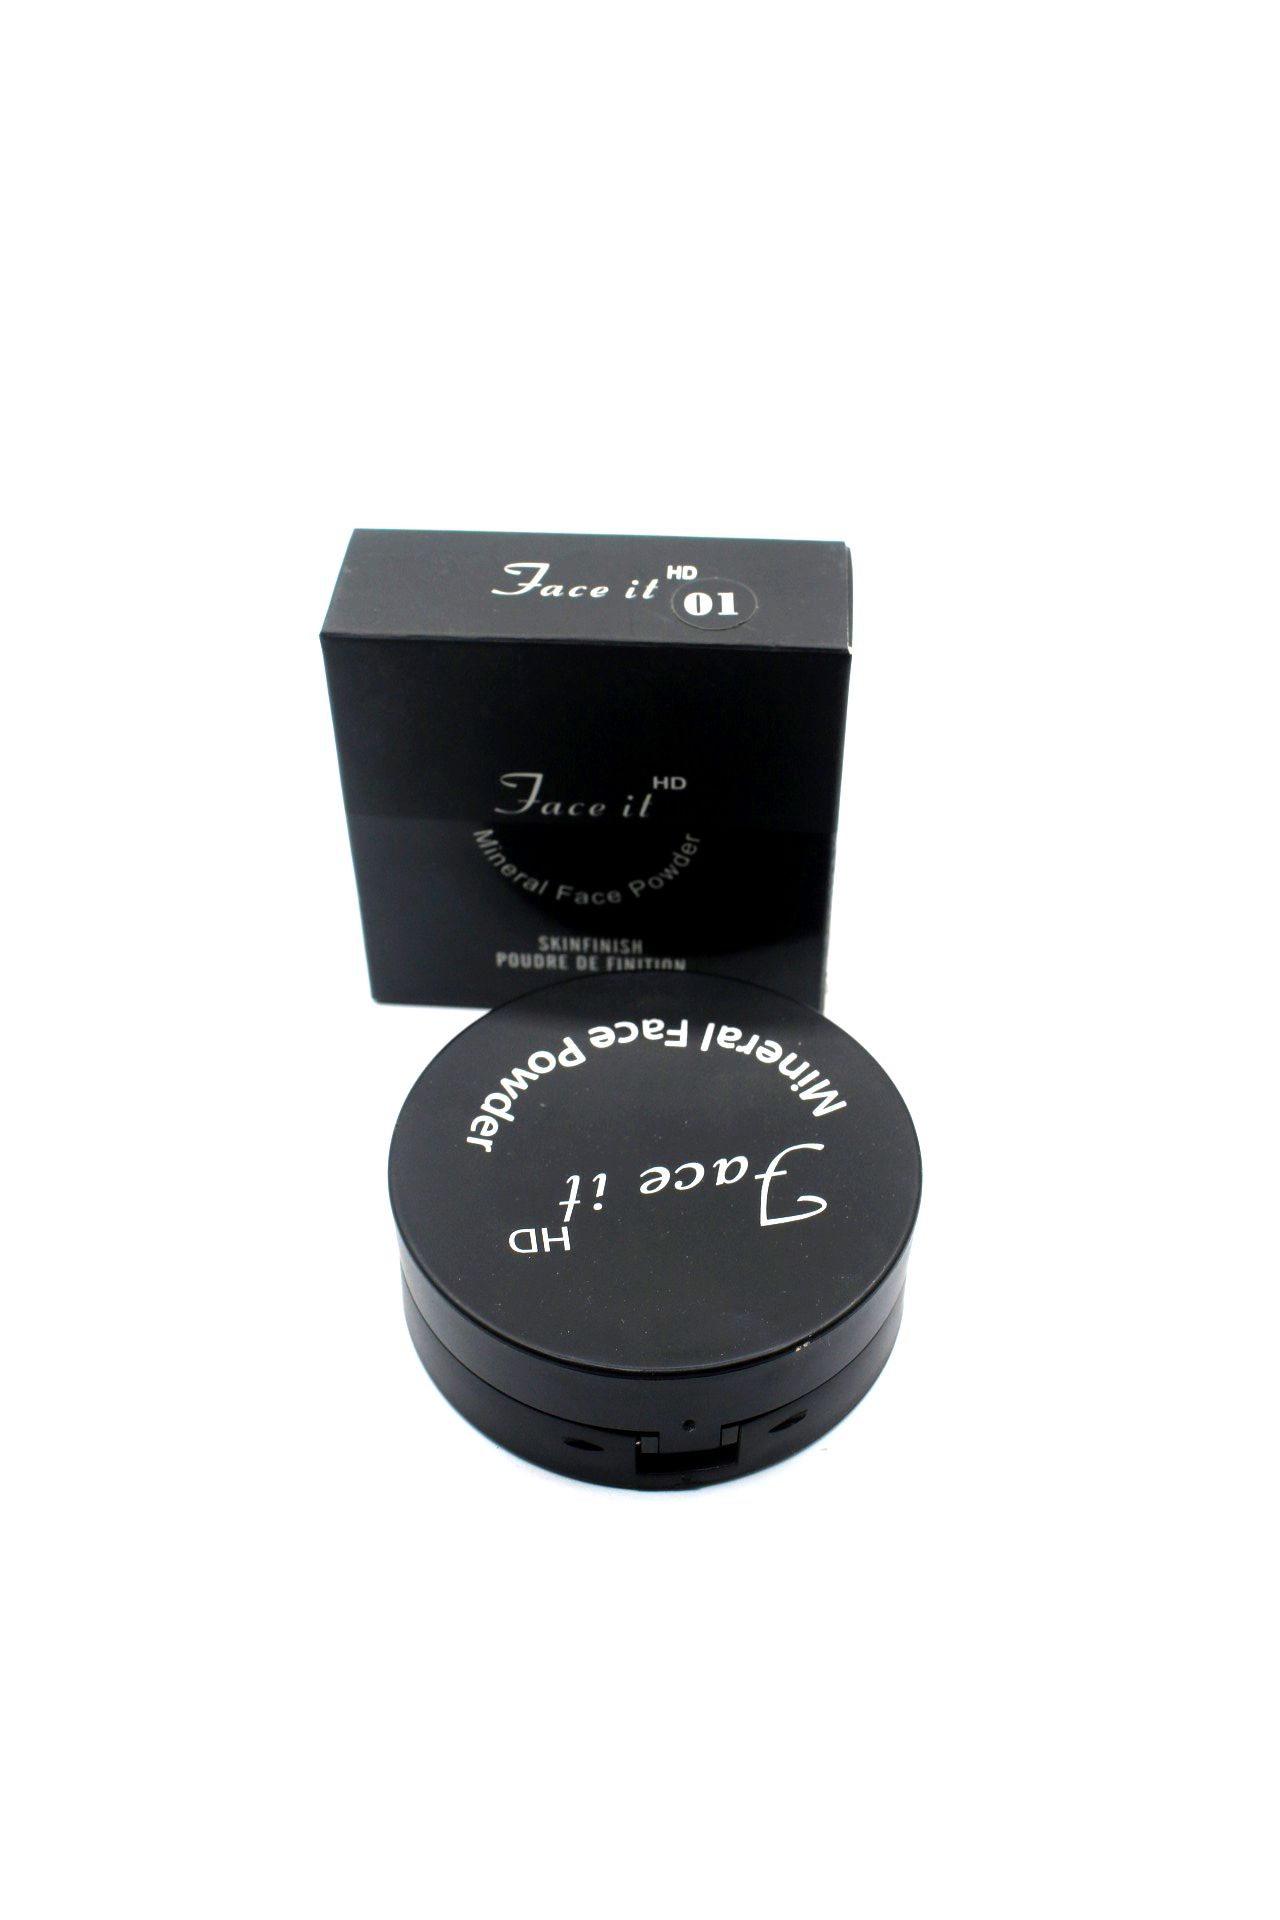 Face it HD mineral Face Powder  01